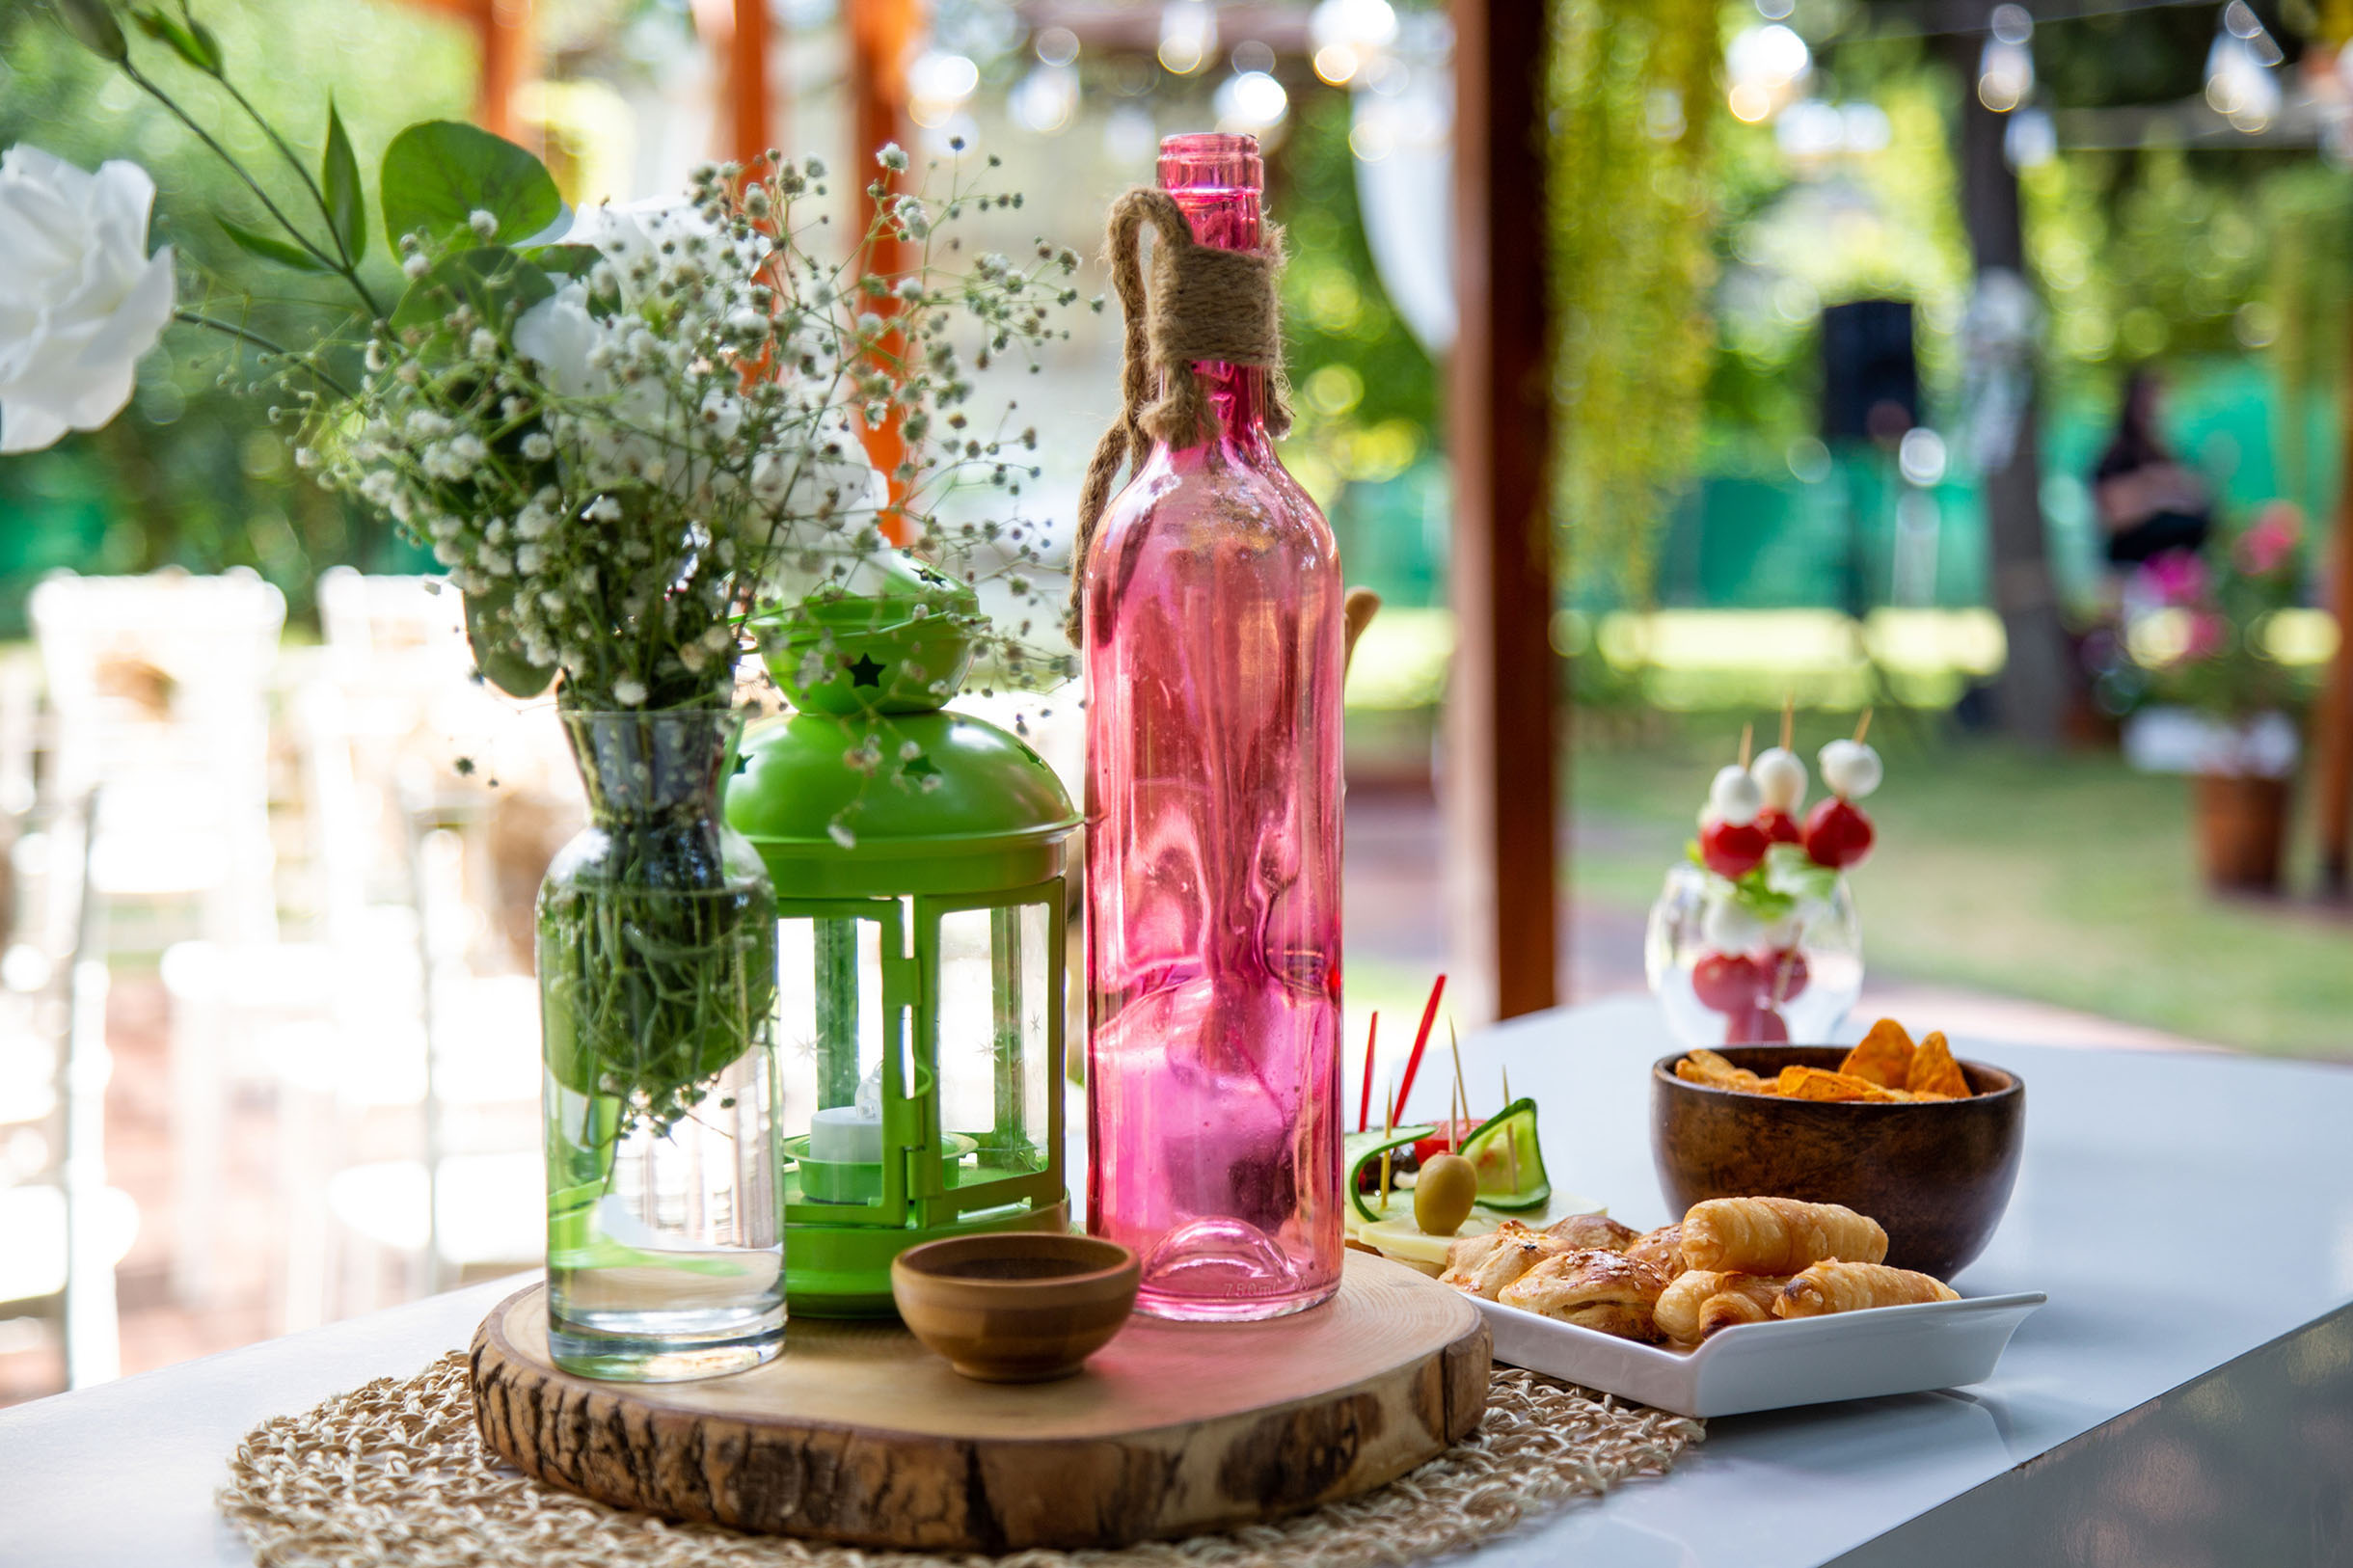 Detail image from a wedding with coloured glass bottles and a lantern on a wooden plate at an outdoor space.